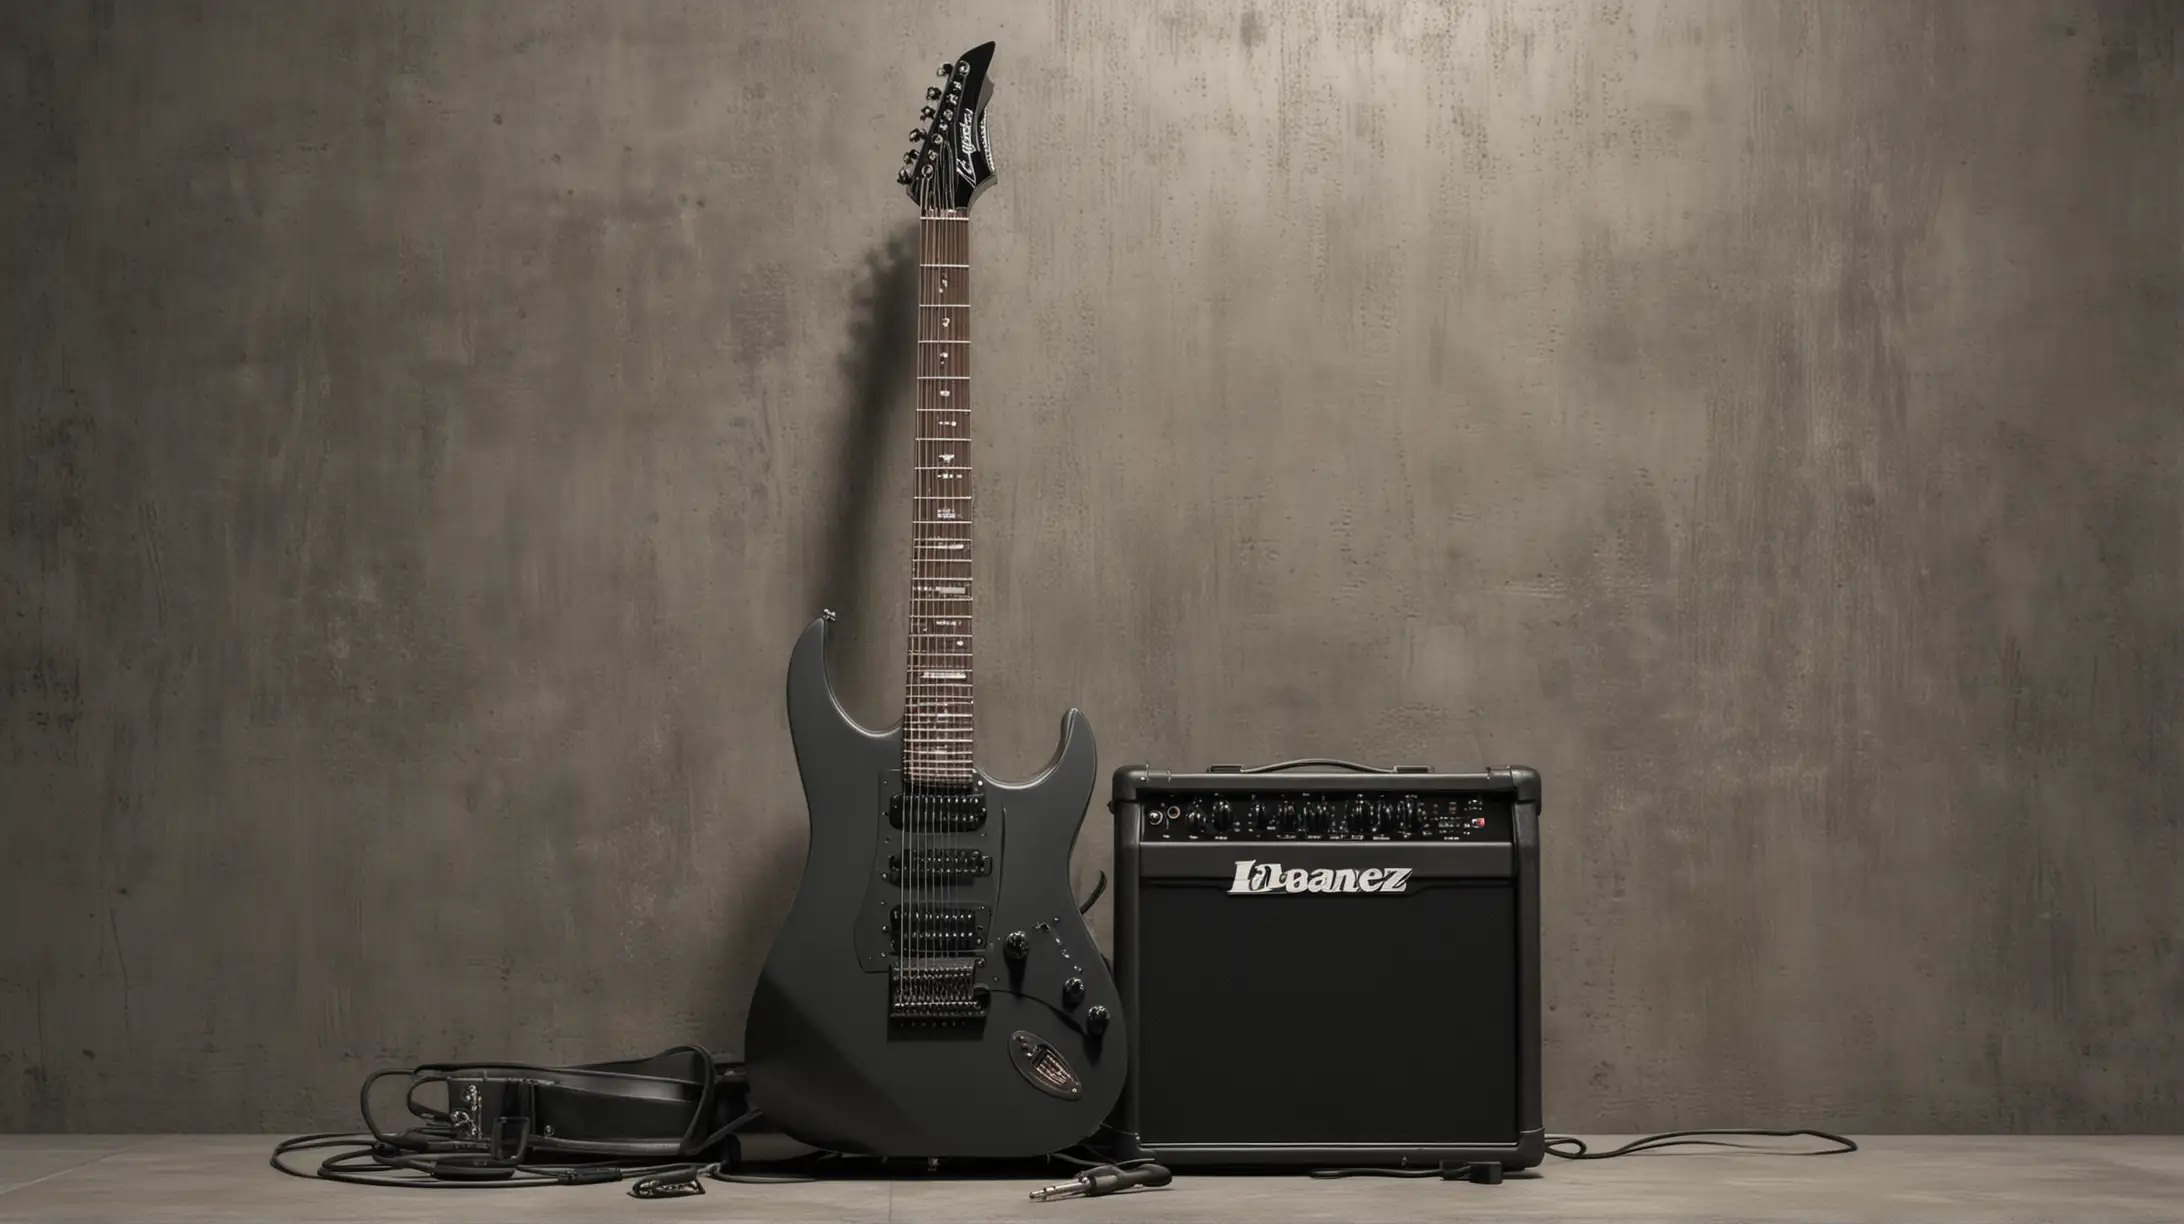 Realistic Ibanez Metal Electric Guitar on Amp with Boots